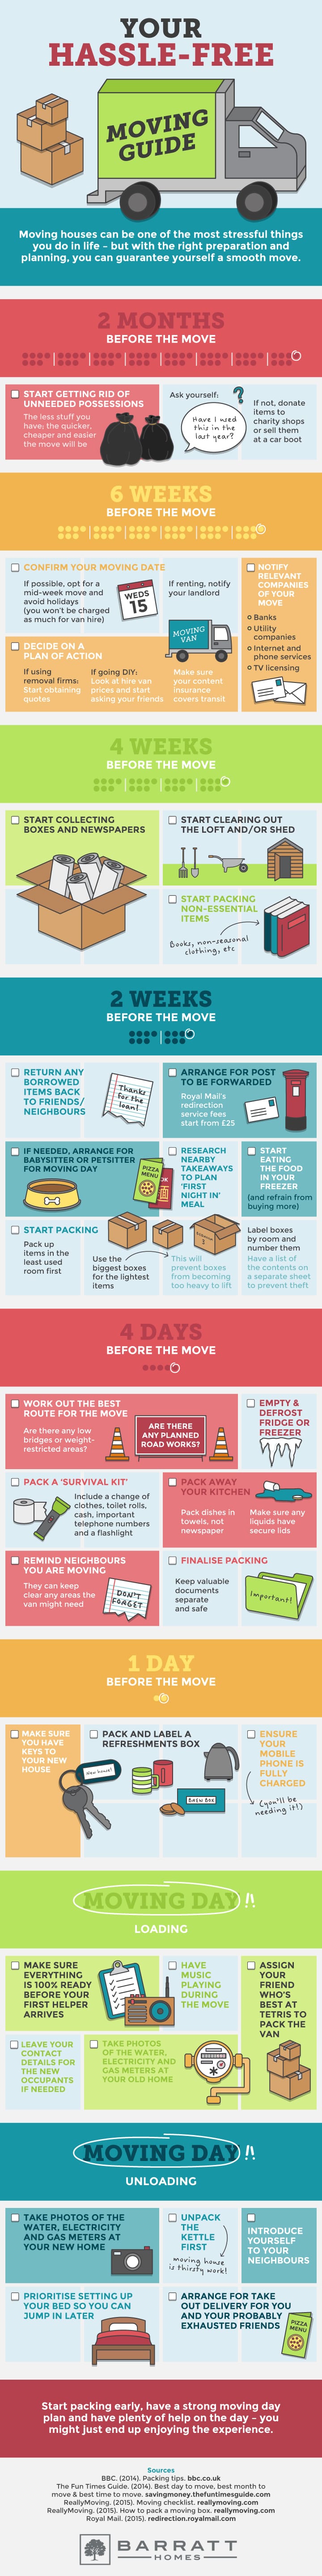 Hassle-Free Moving Guide